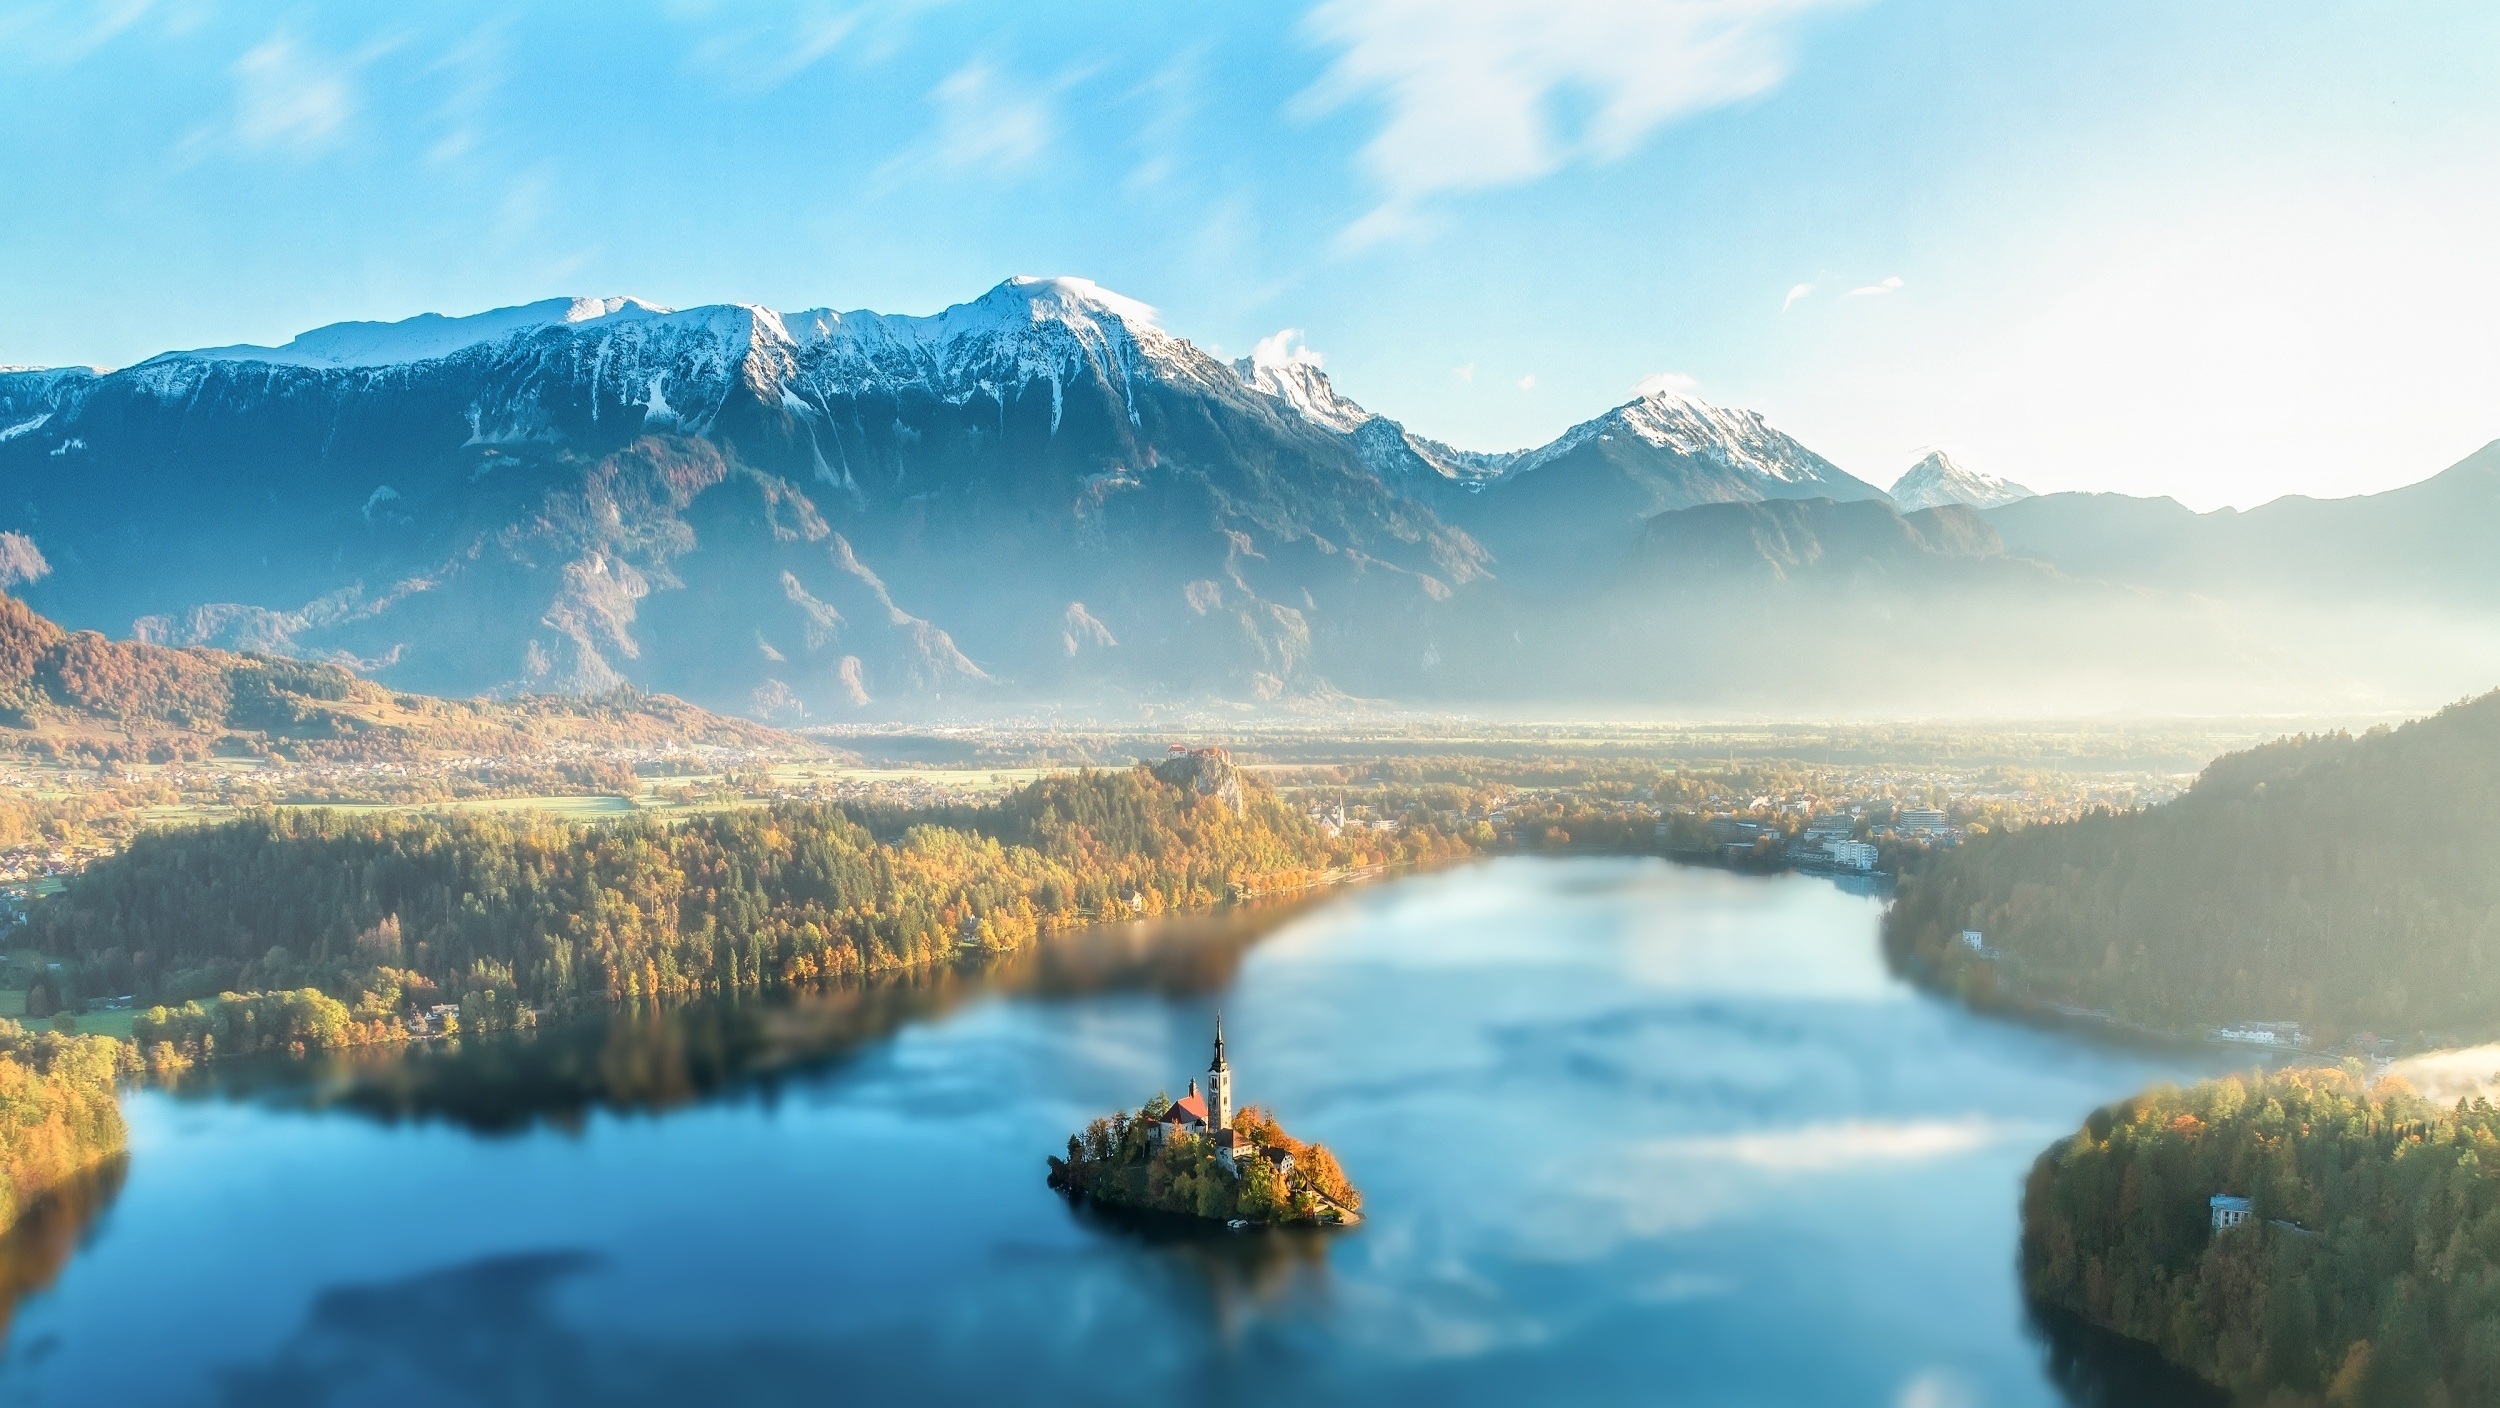 General 2500x1408 landscape lake Slovenia Lake Bled forest mist church snowy peak mountains clouds dawn hills nature outdoors reflection pine trees snow sunset water cyan island sky aerial view